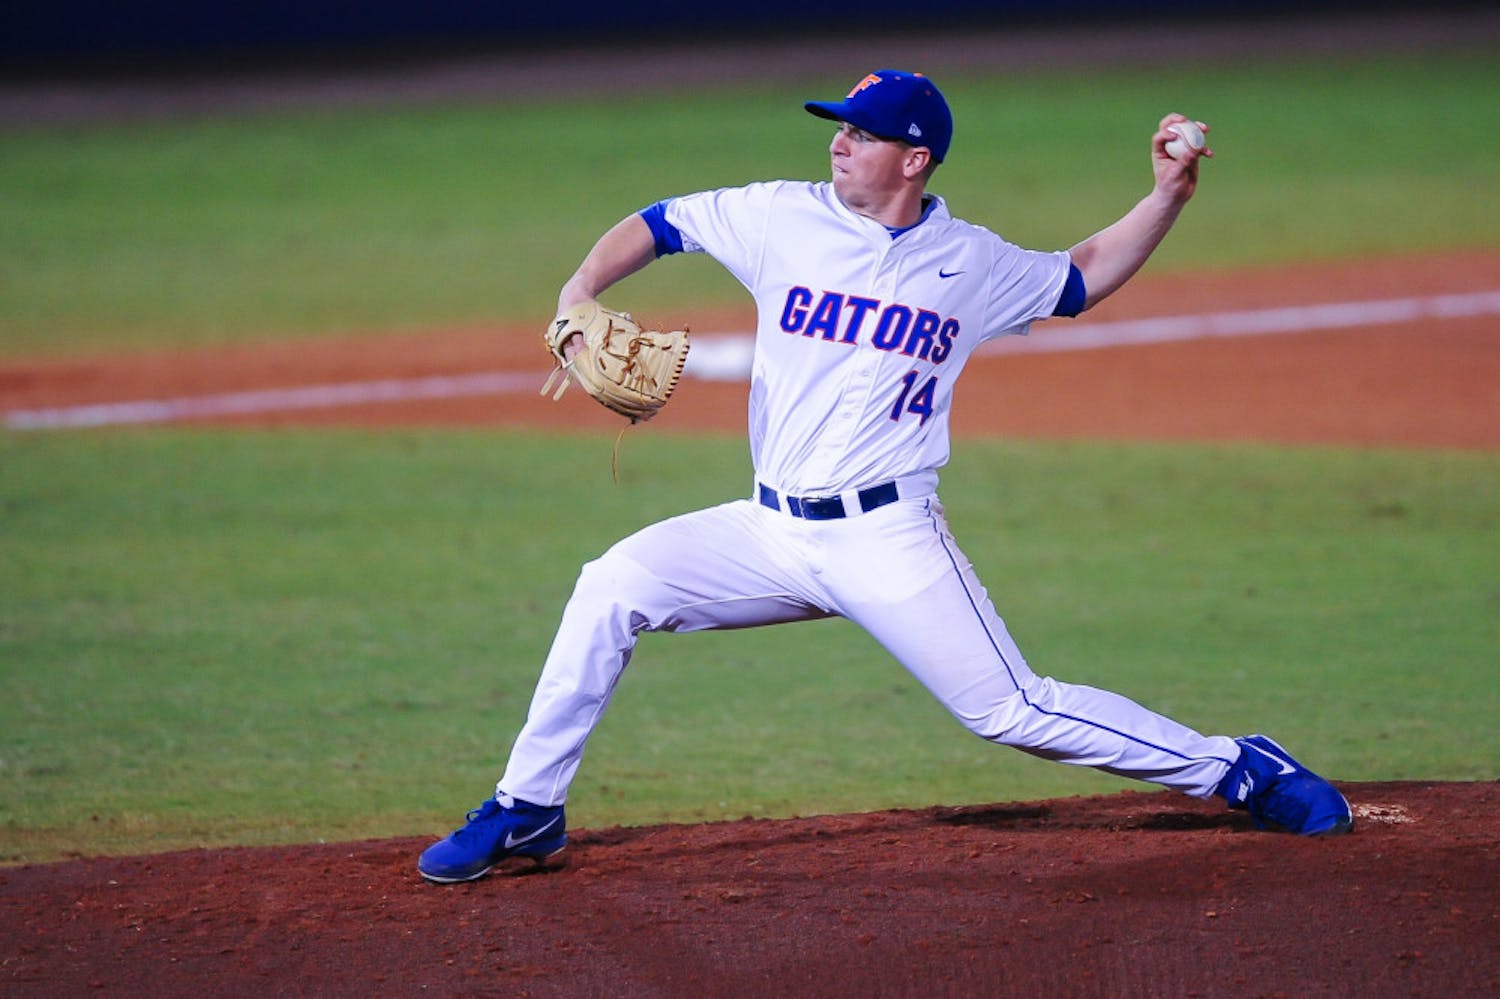 Bobby Poyner pitched 5.1 innings in No. 23 Florida's 4-0 opening night victory over Maryland.